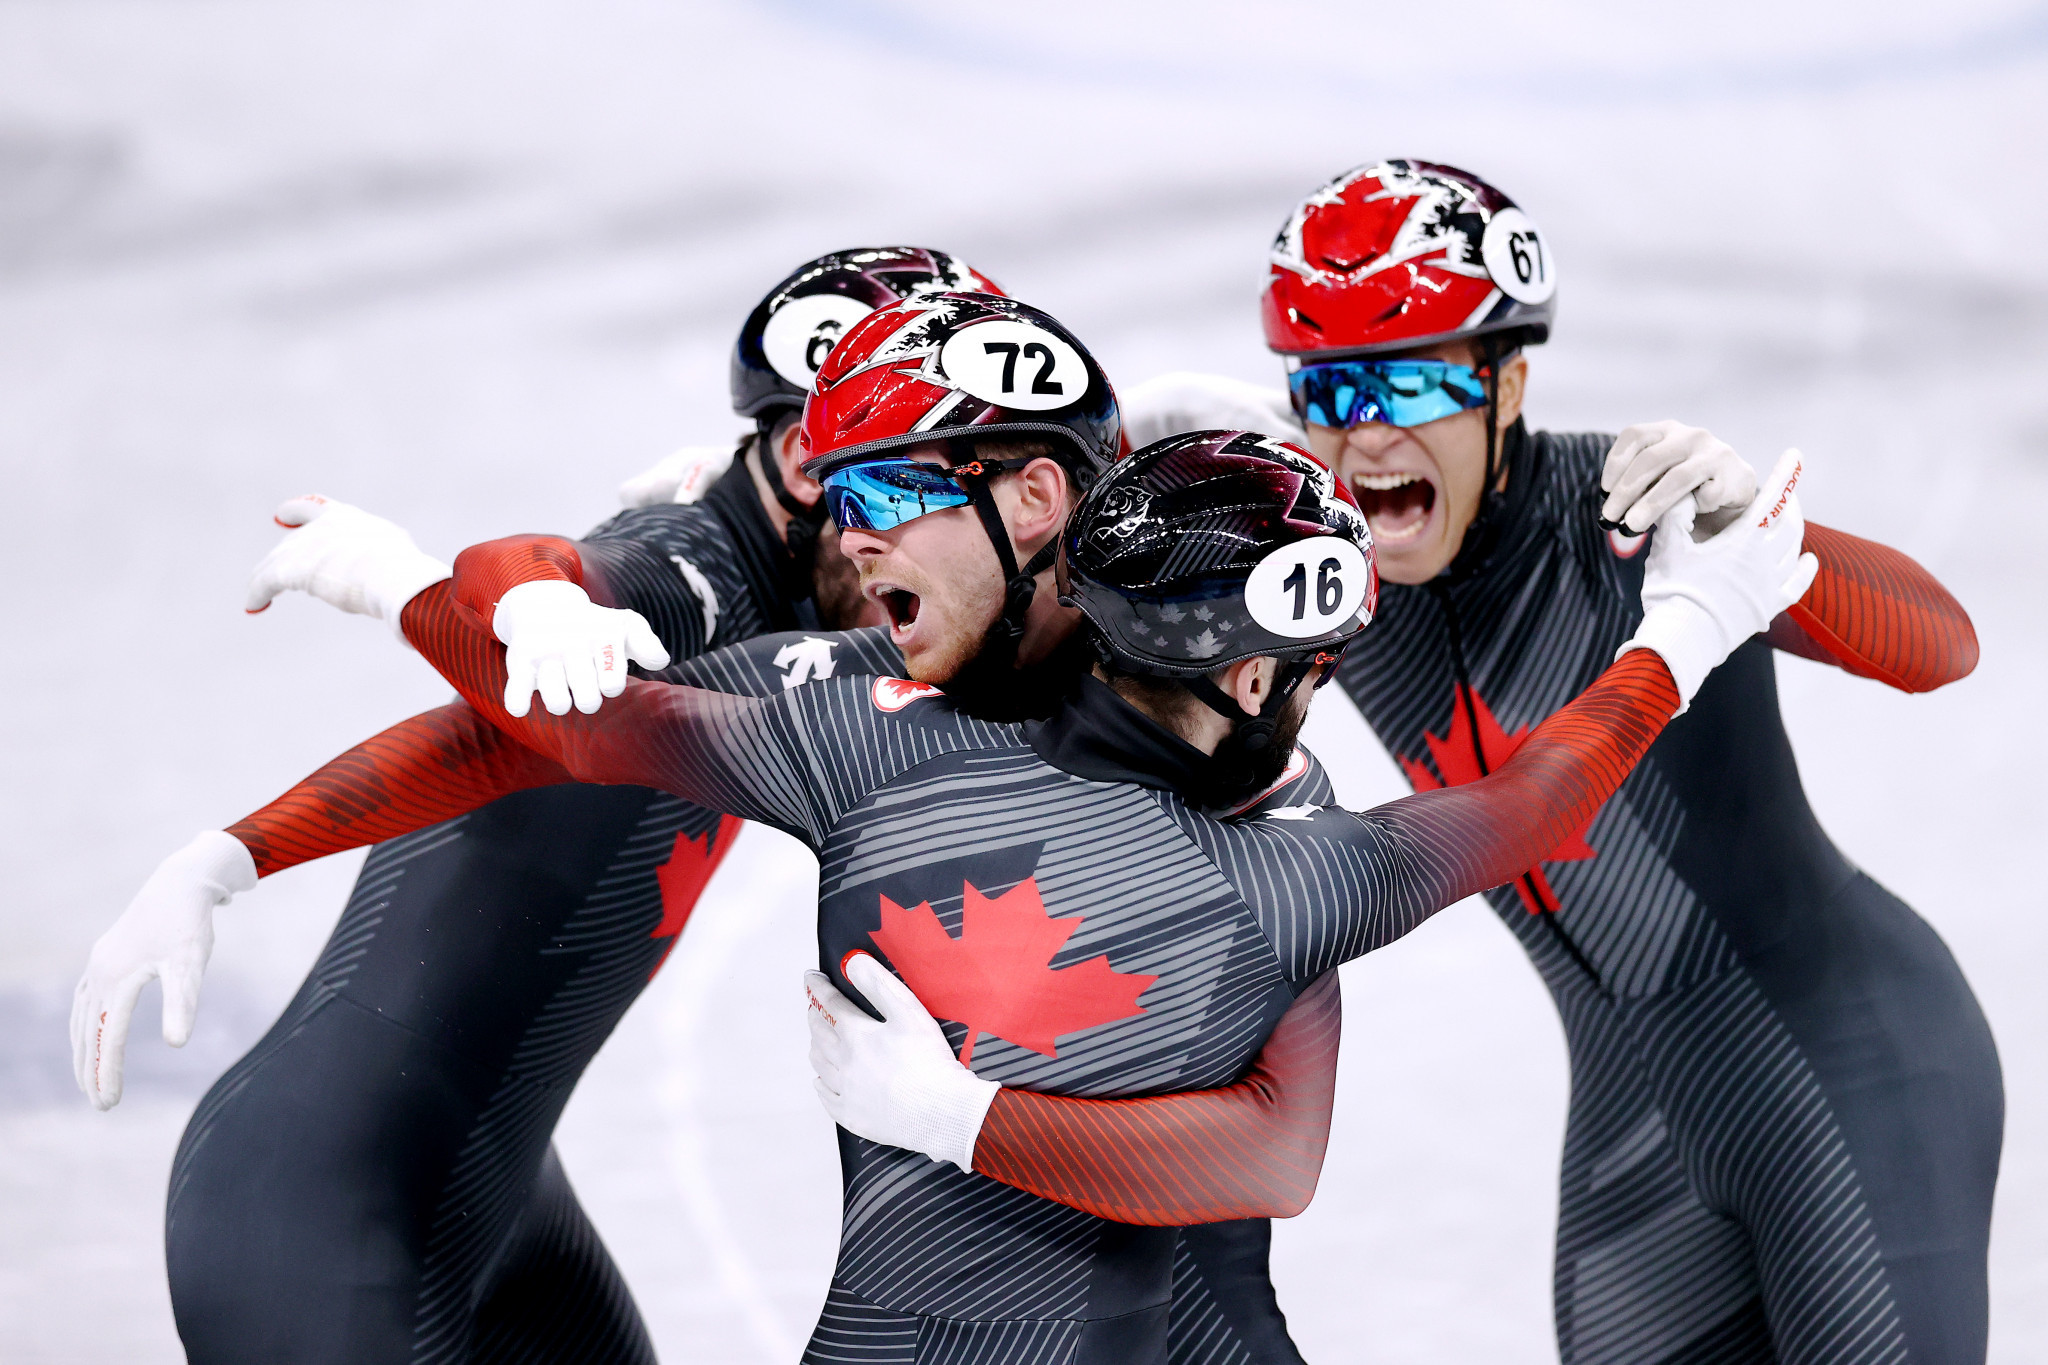 The World Short Track Speed Skating Championships in Montreal have been moved to April ©Getty Images